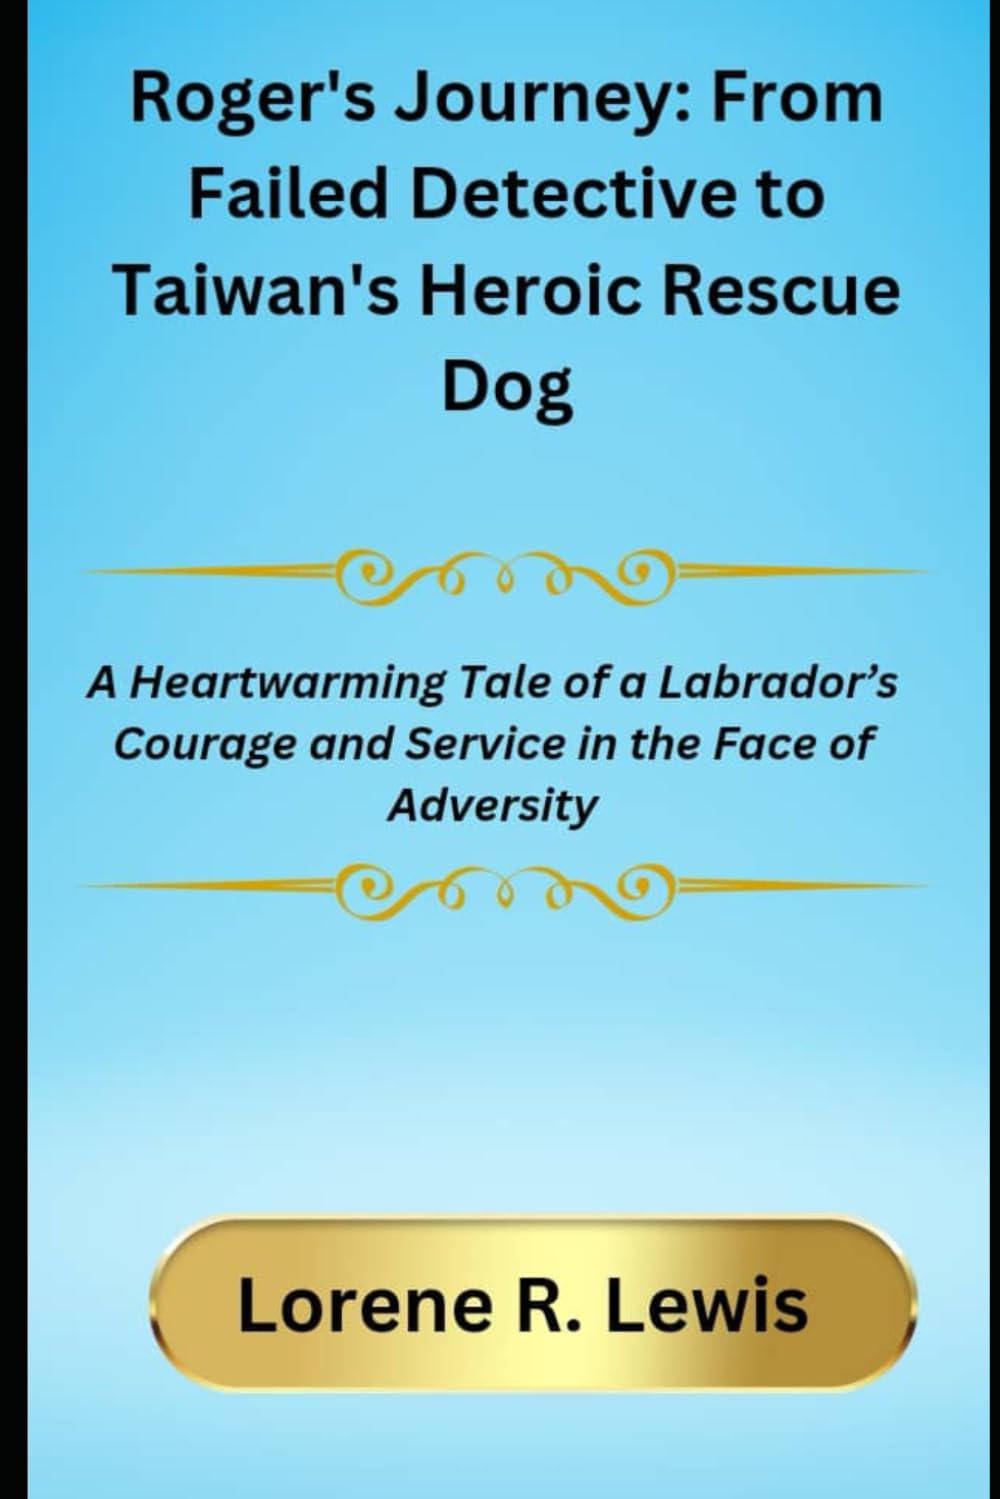 Roger's Journey: From Failed Detective to Taiwan's Heroic Rescue Dog: A Heartwarming Tale of a Labrador’s Courage and Service in the Face of Adversity